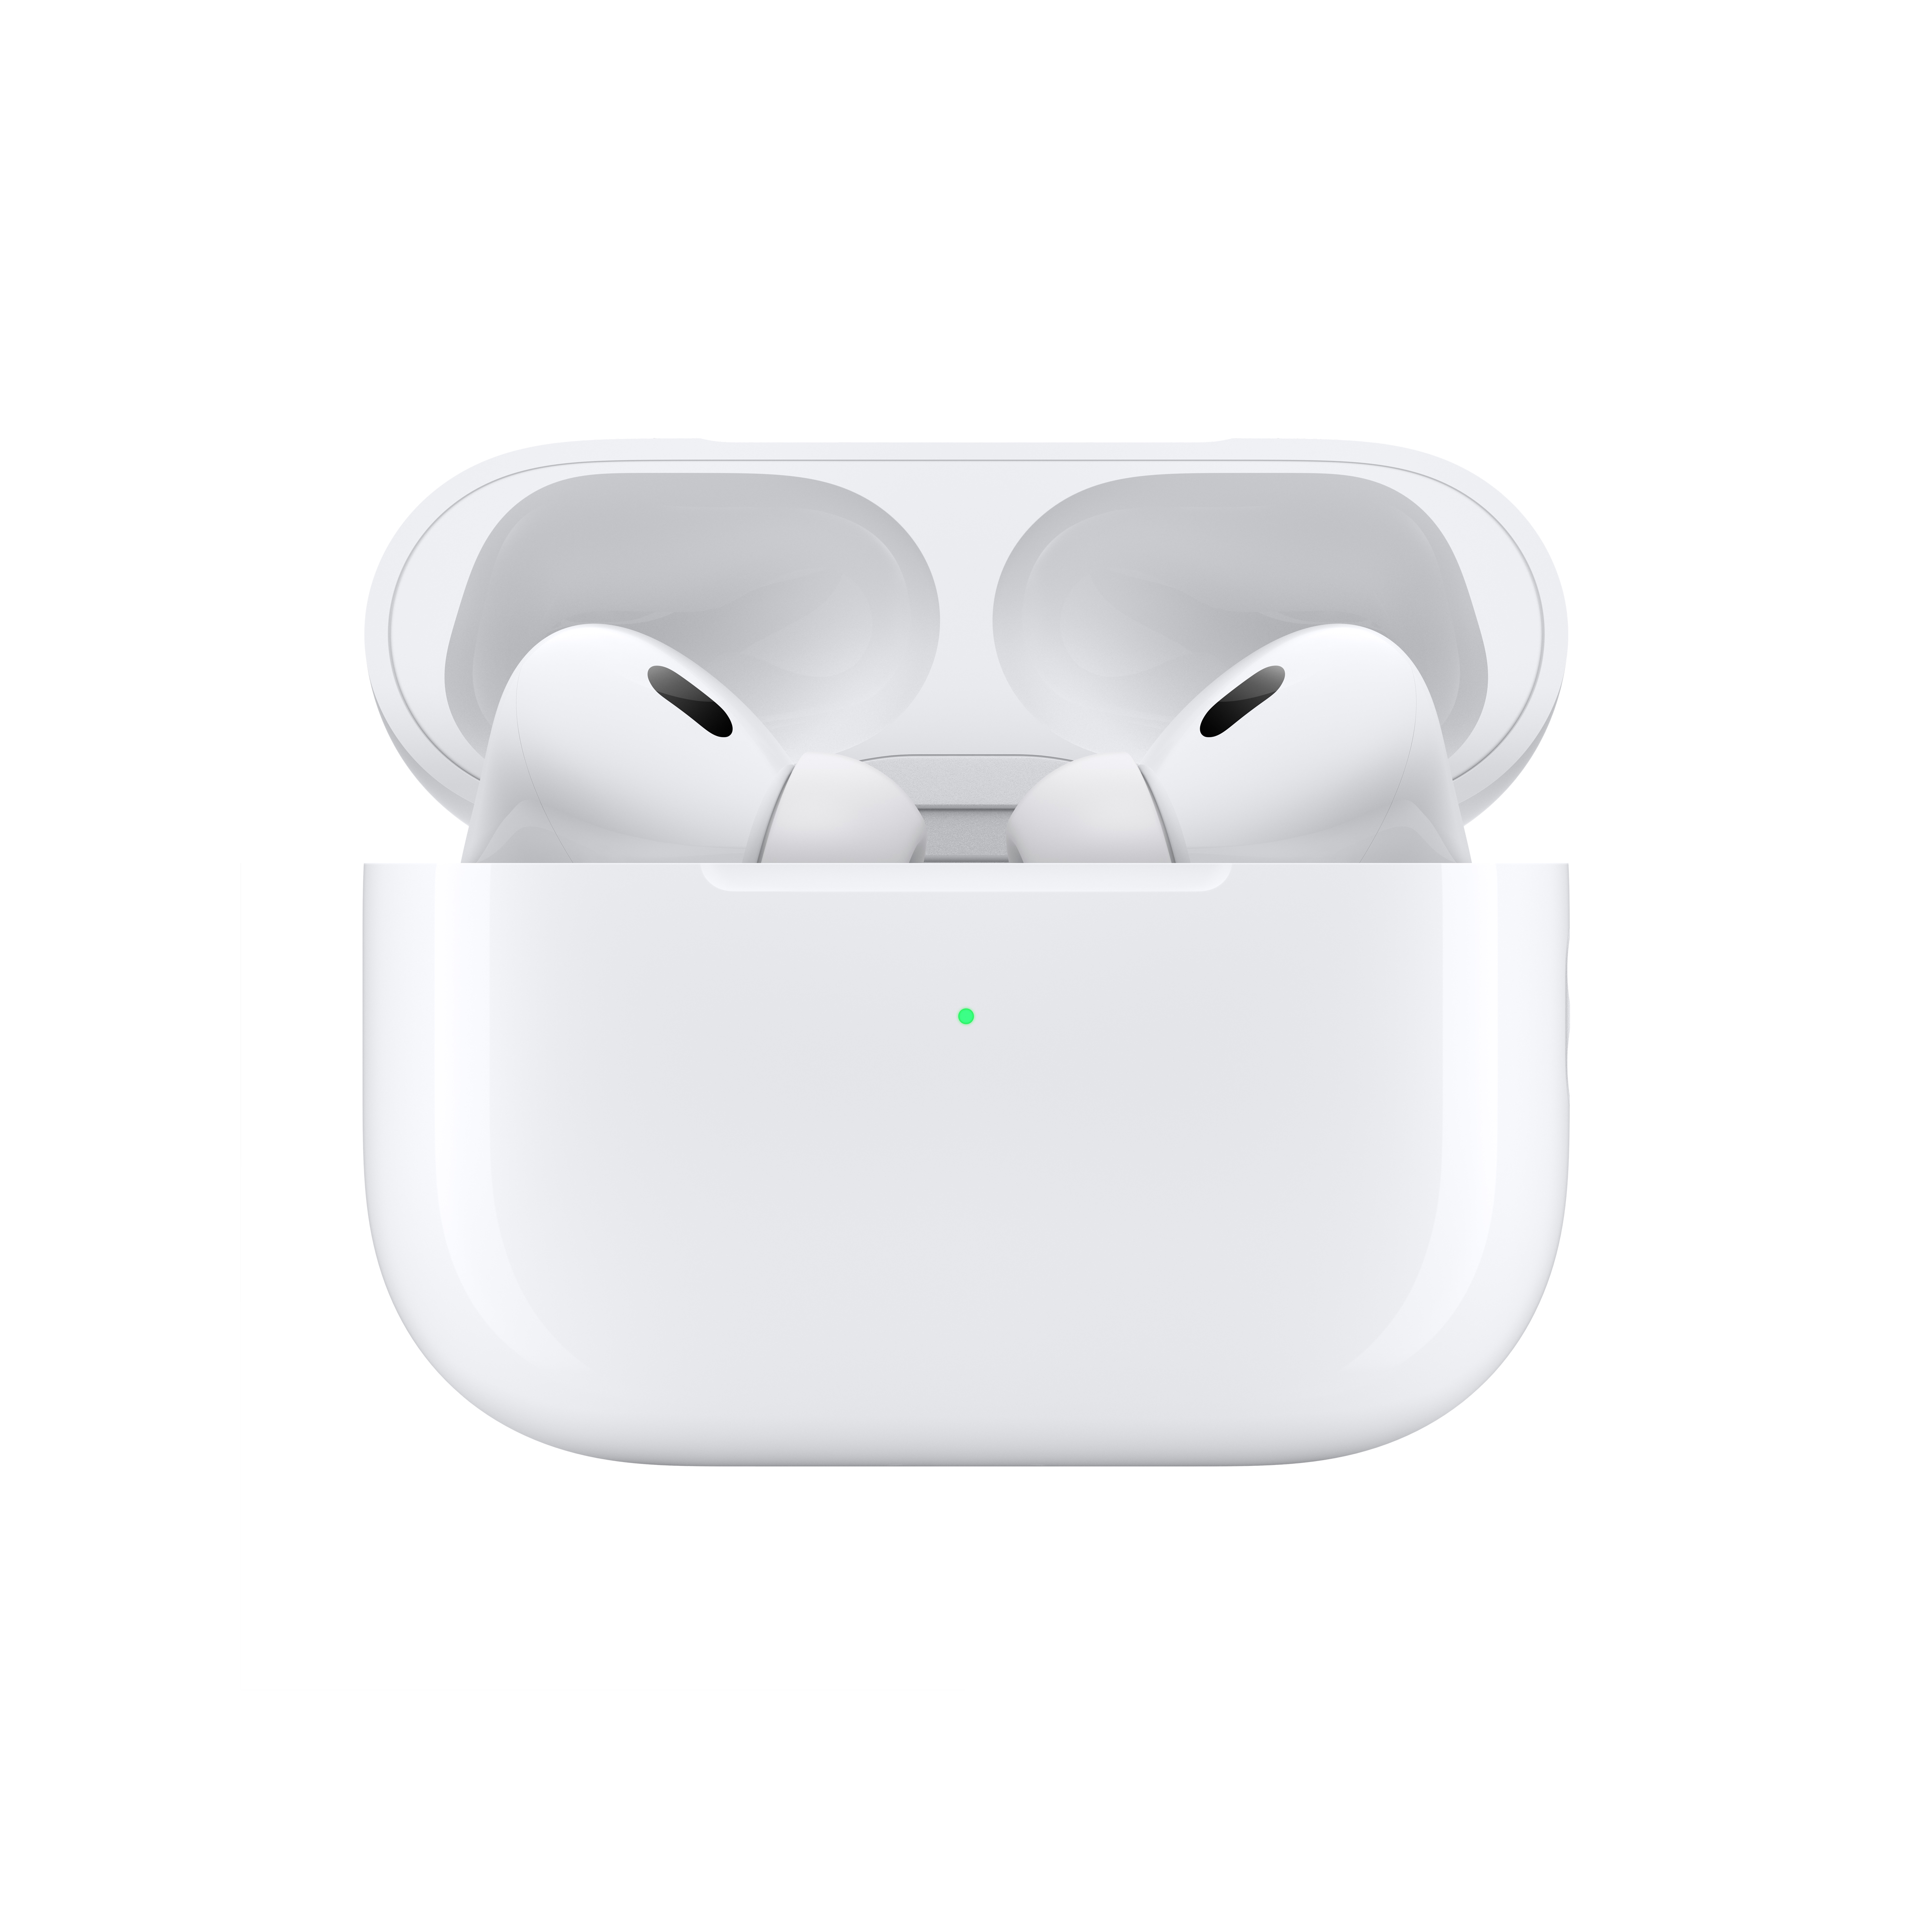 SEA_AirPods_Pro_2nd_Gen_PDP_Image_Position-3.jpg